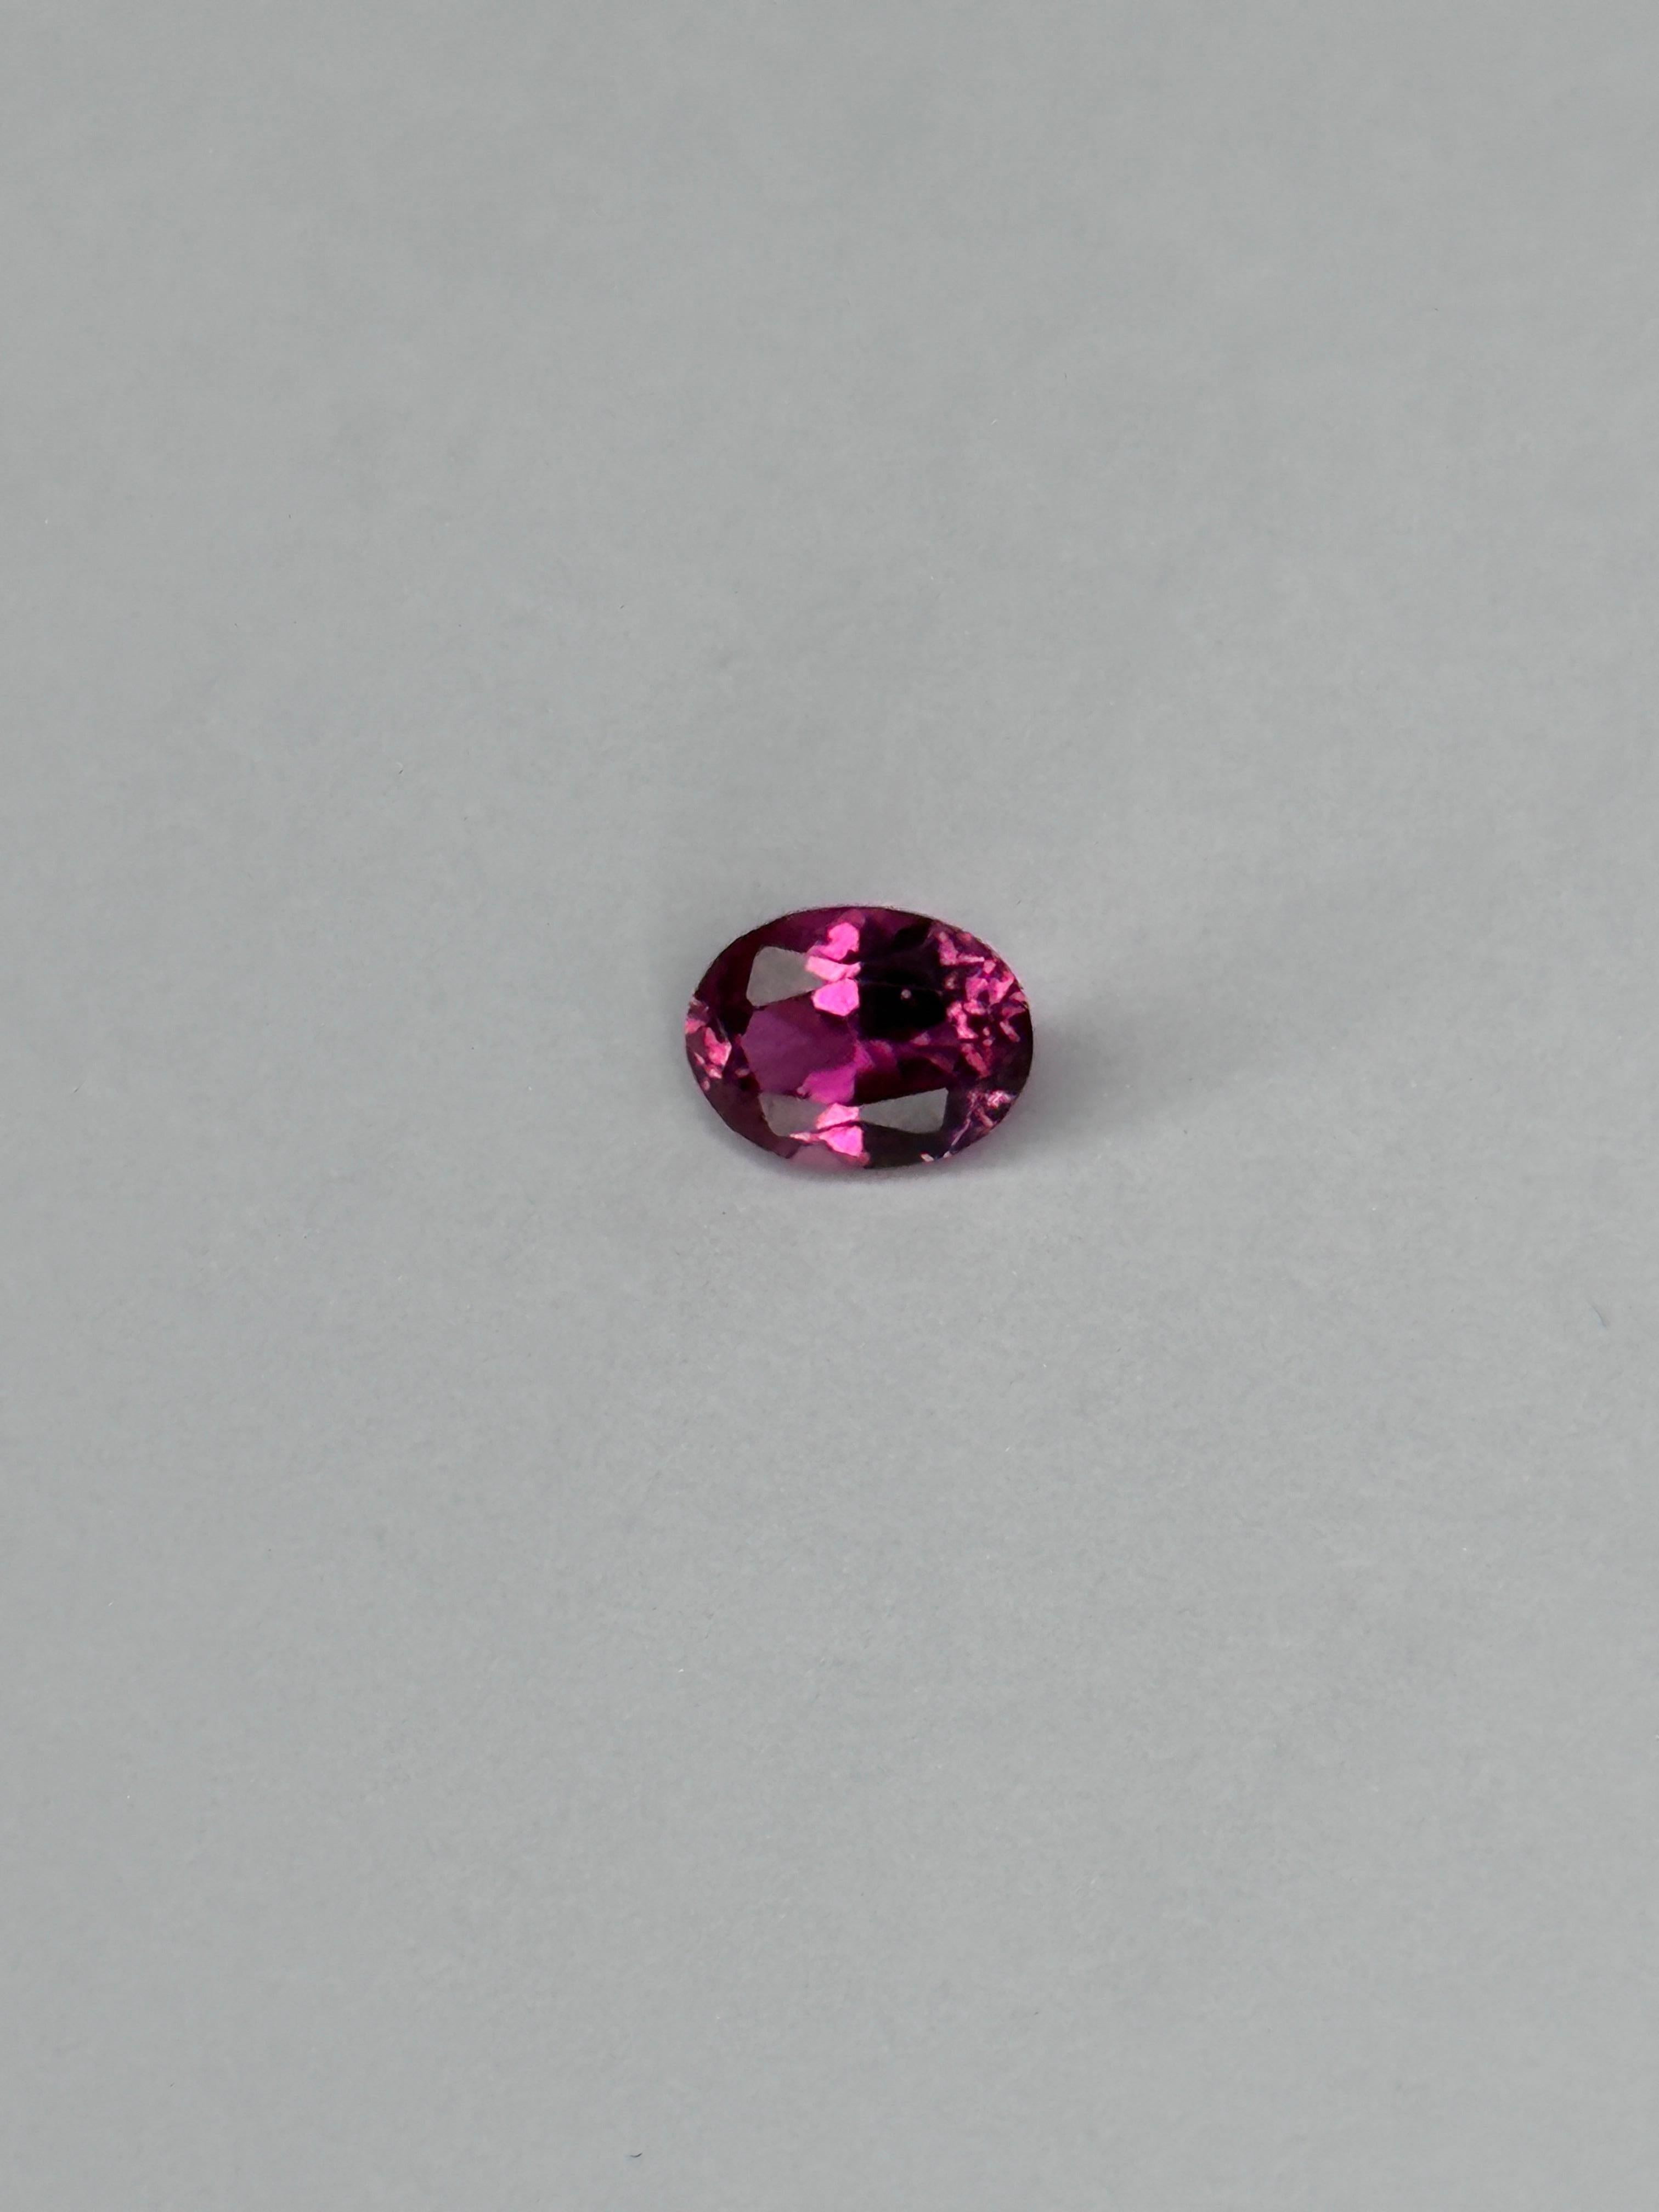 A wonderful Rubellite Tourmaline with an intense pink color from the famous Umba River located in the great African nation, Tanzania.

ID #: TRMC254
Weight: 0.93 Carats
Shape: Oval
Crown: Modified Brilliant
Pavilion: Modified Brilliant
Gem